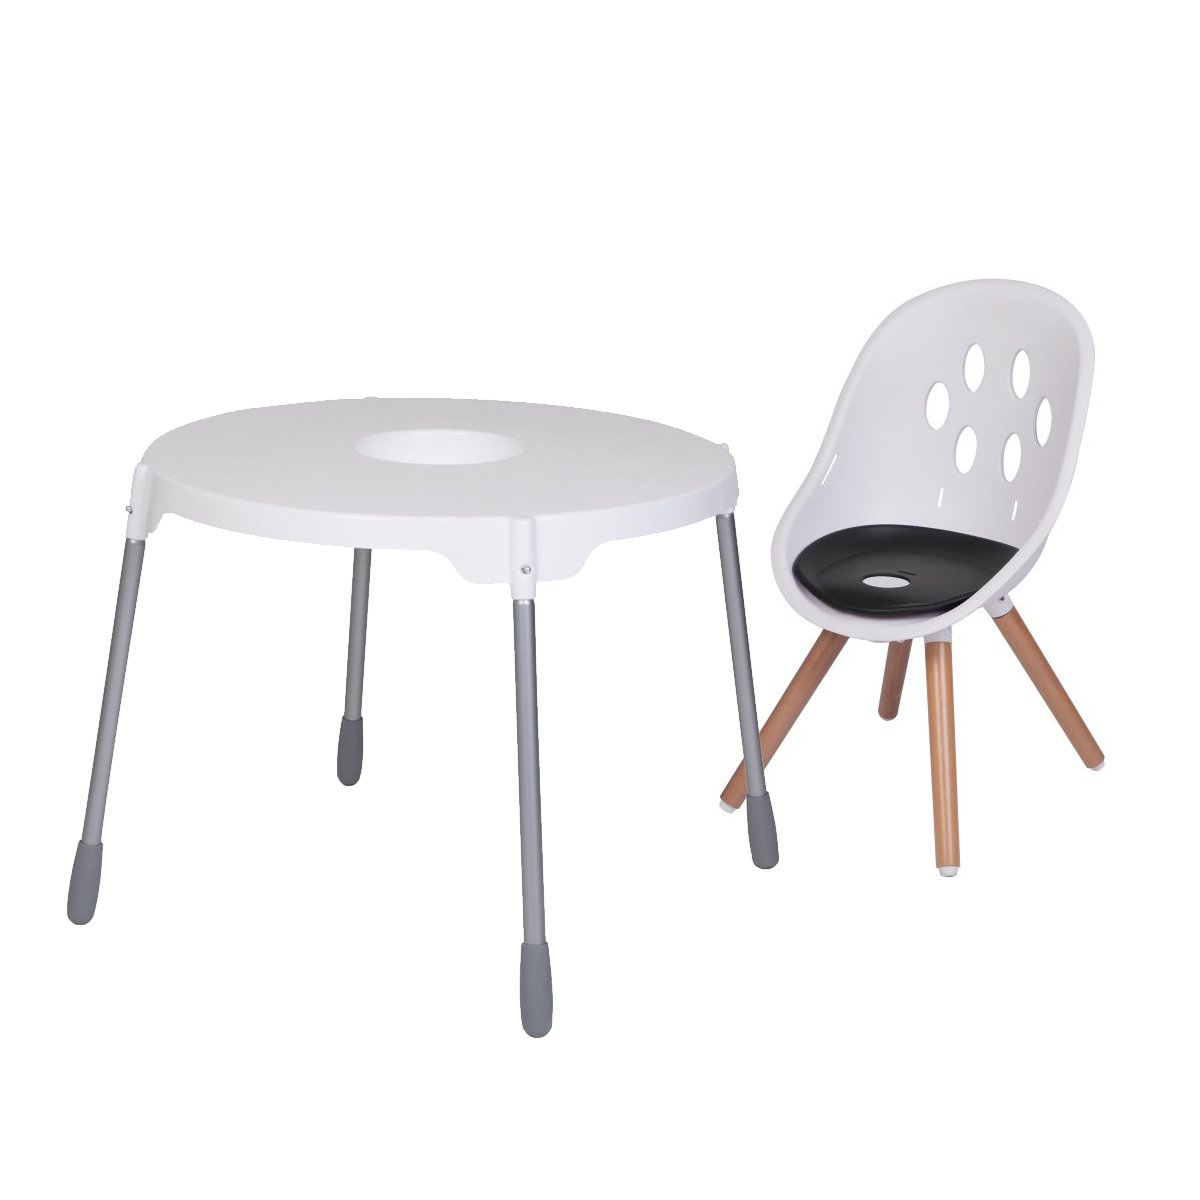 https://cdn.accentuate.io/8551380844883/19272668184664/phil_and_teds_poppy_wood_leg_high_chair_to_my_chair_dual_modes_1_combo-v1698266310237.jpg?1200x1200